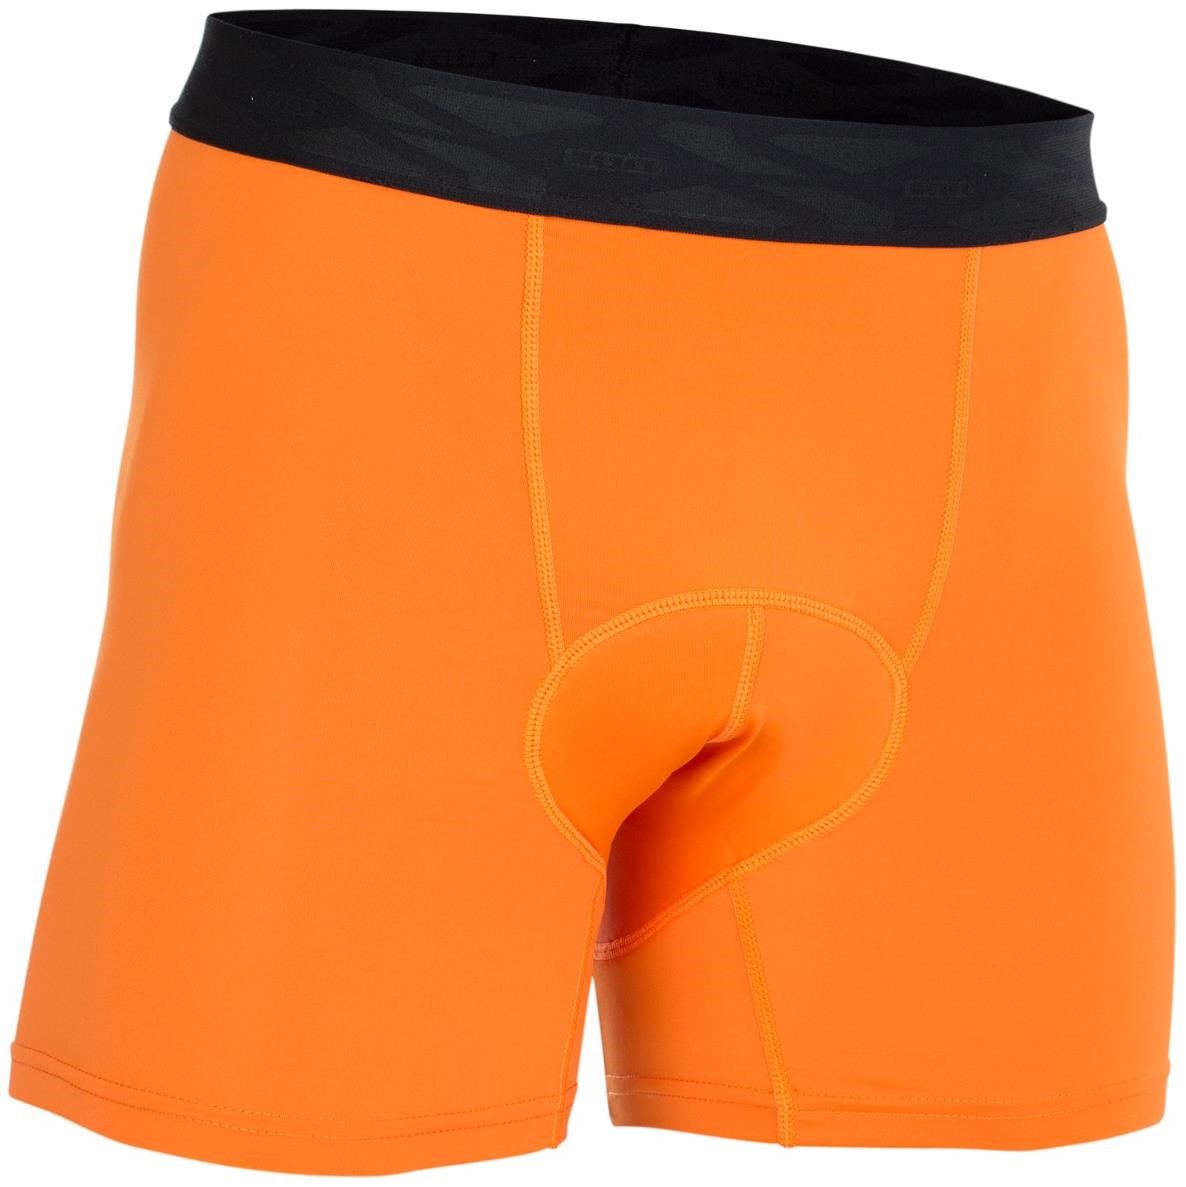 Ion In-Shorts Liner Shorts product image